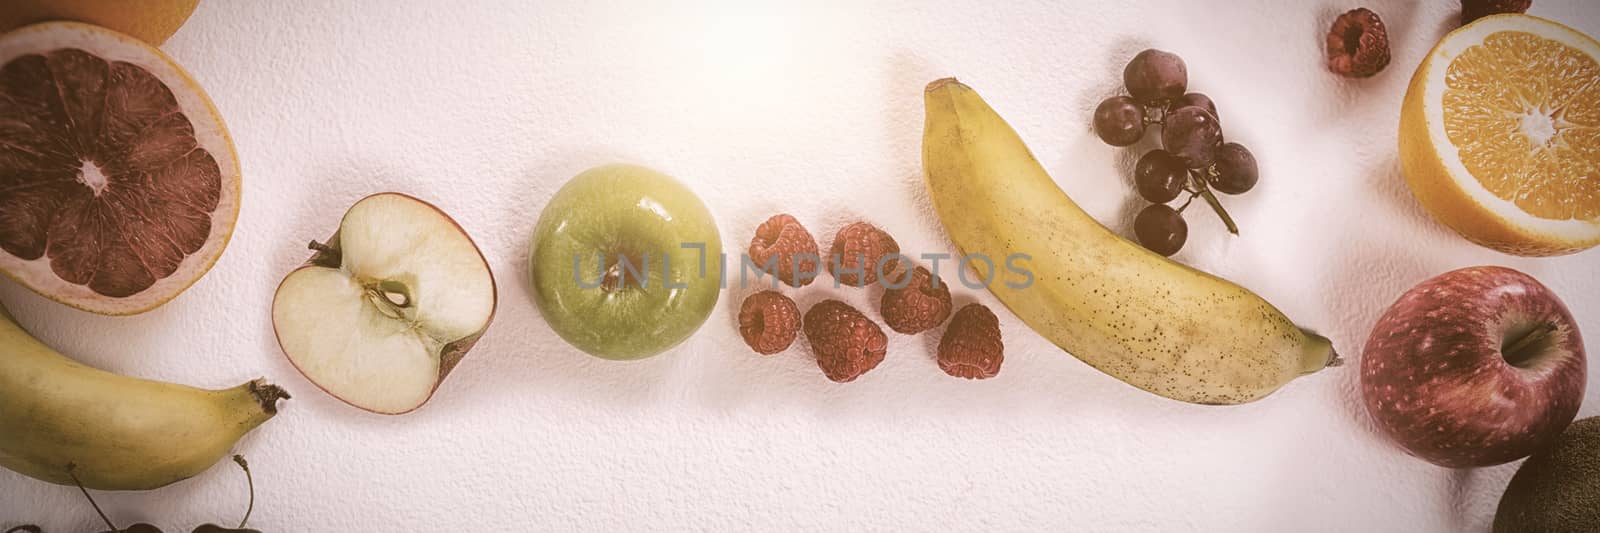 Close-up of various types of fruits arranged on white background